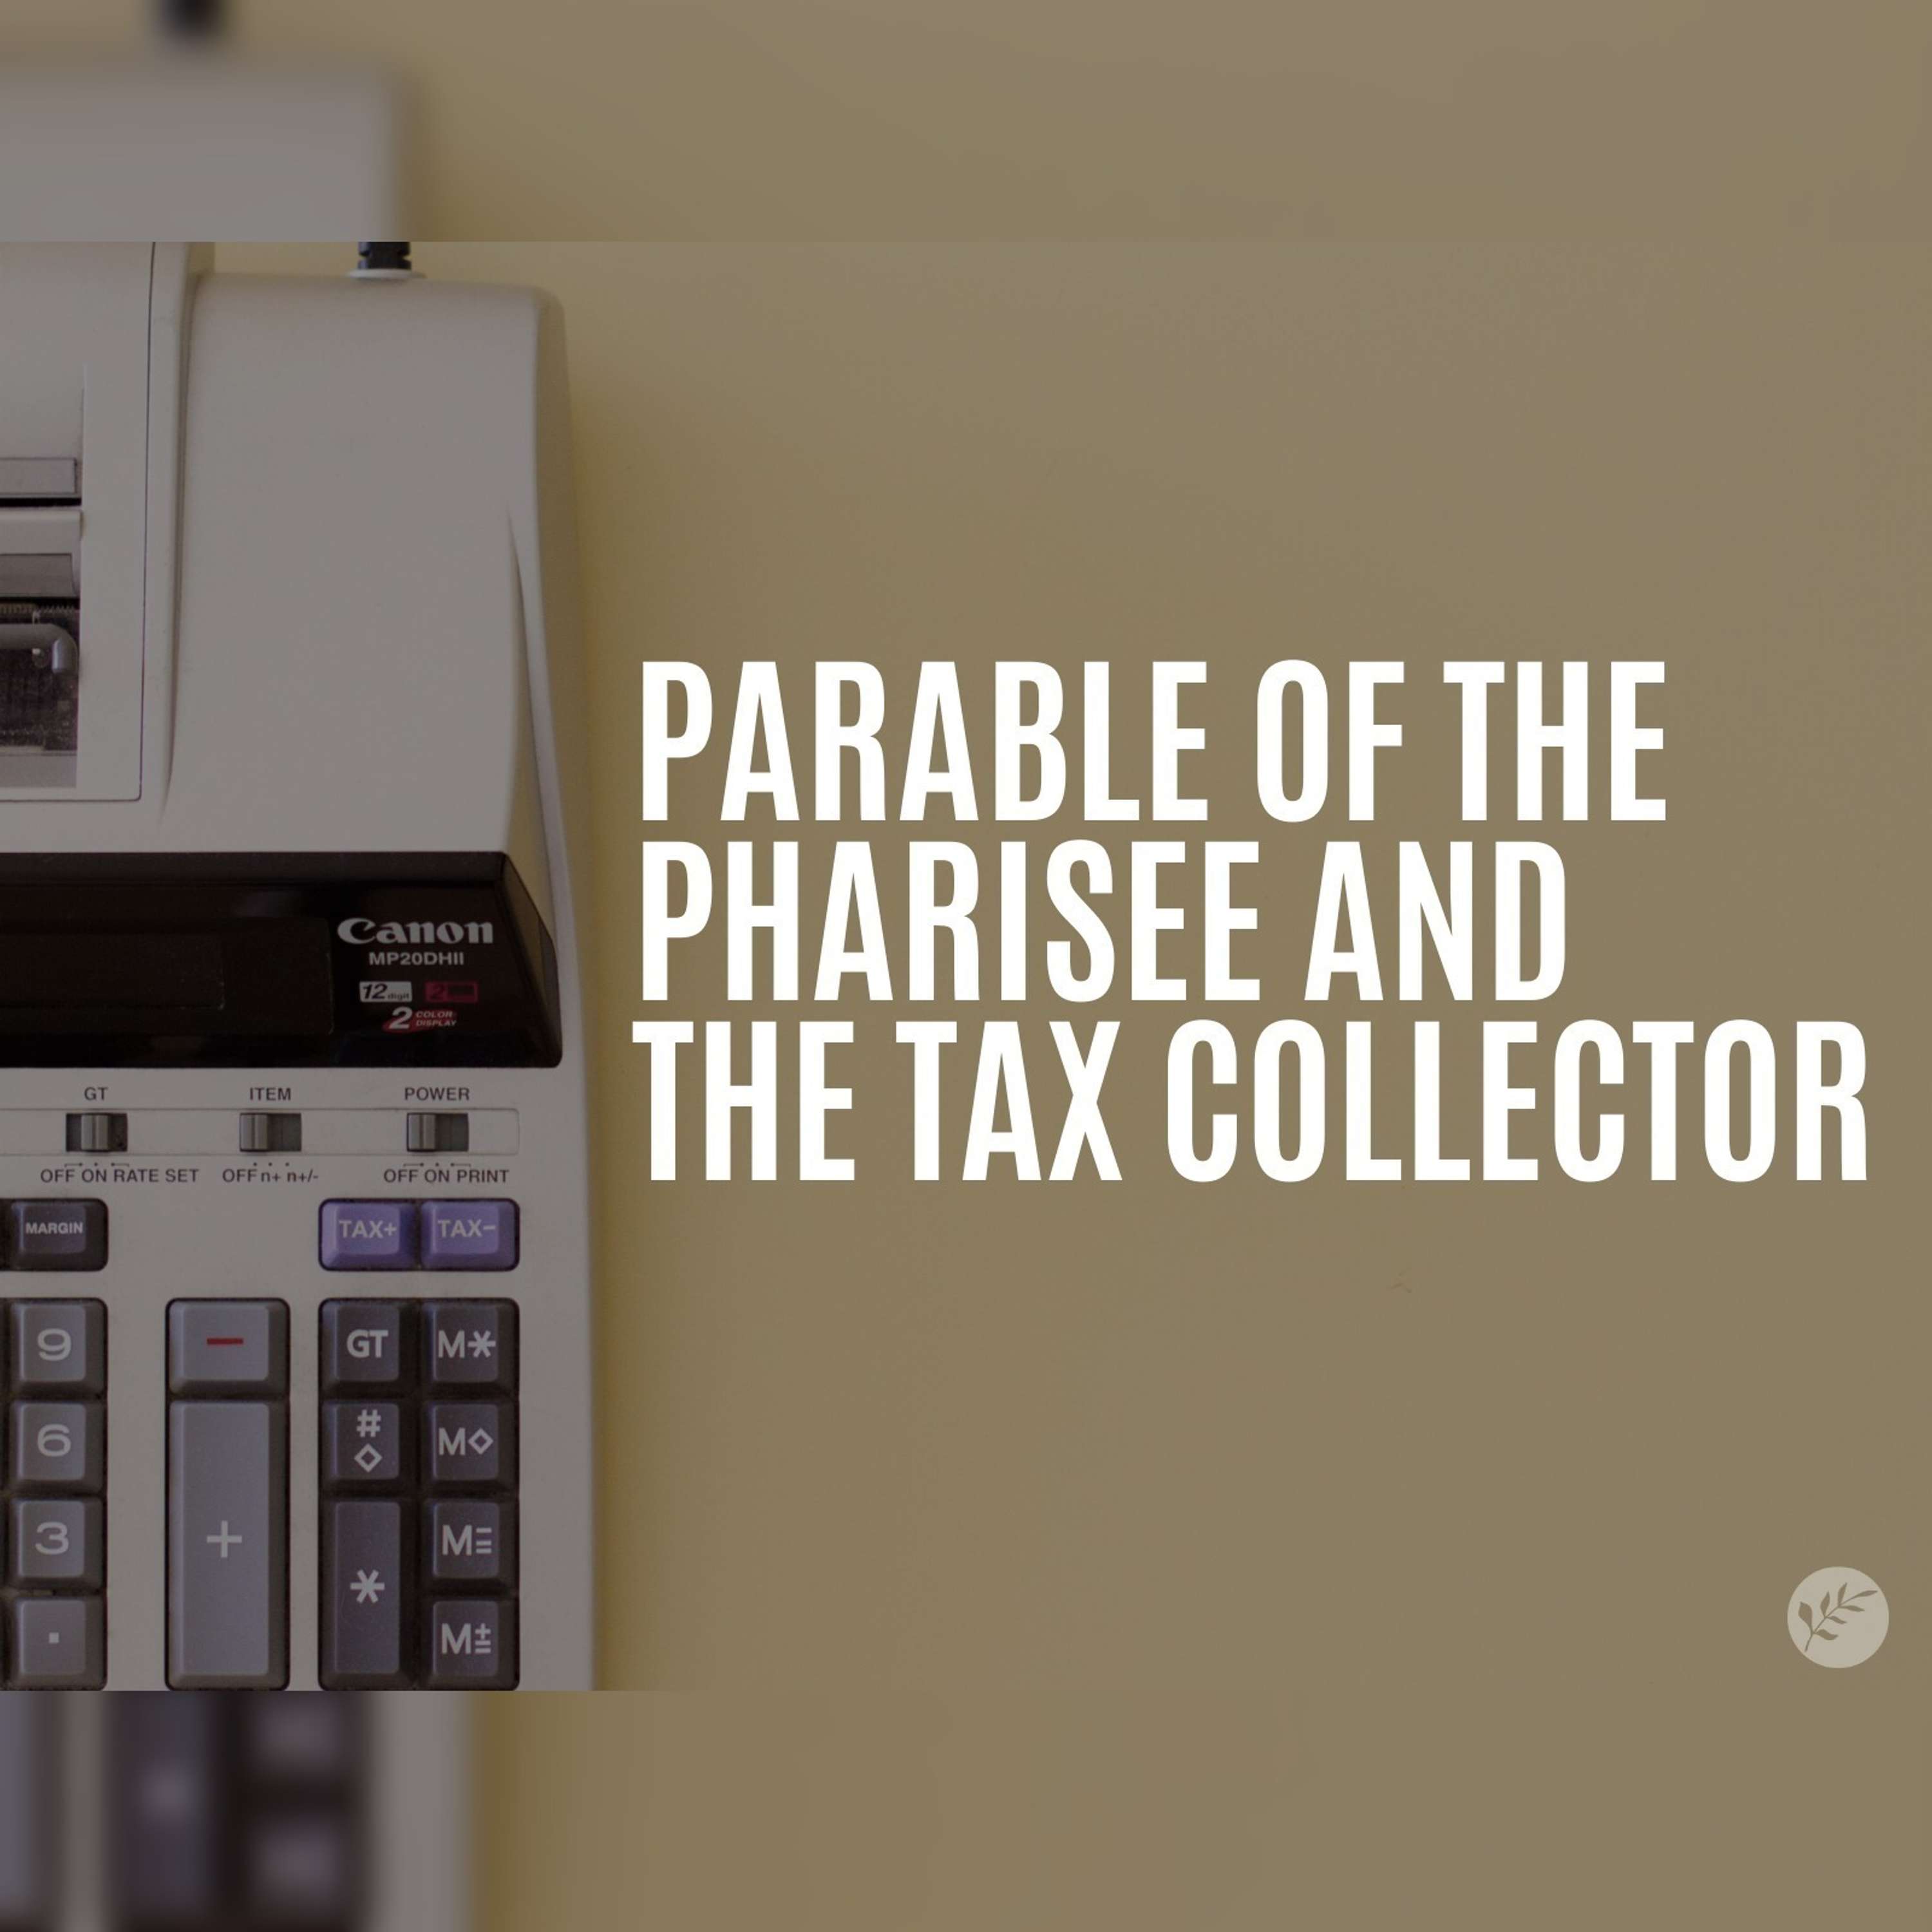 The Parable of the Pharisee and the Tax Collector | Luke 18:9-14